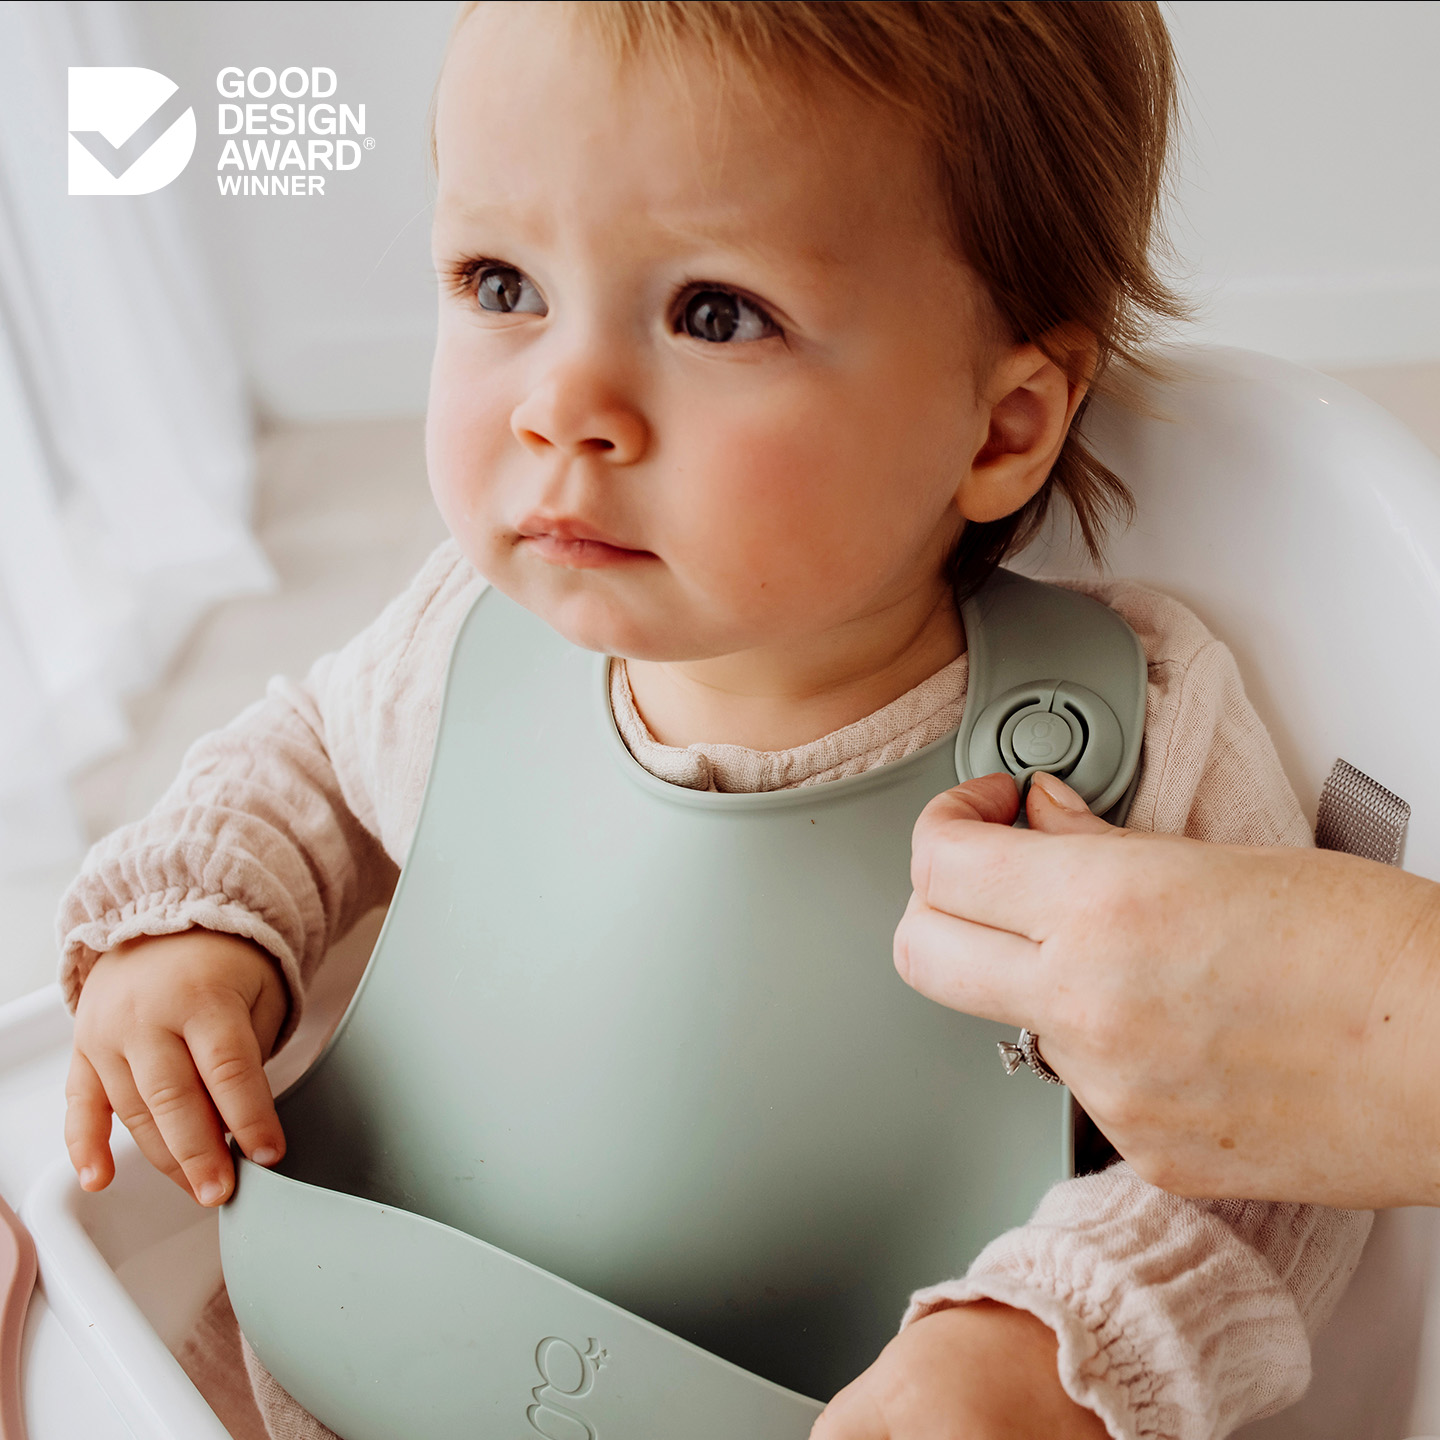 Product Development - The Gigi One-Handed Bib for Infants + Toddlers